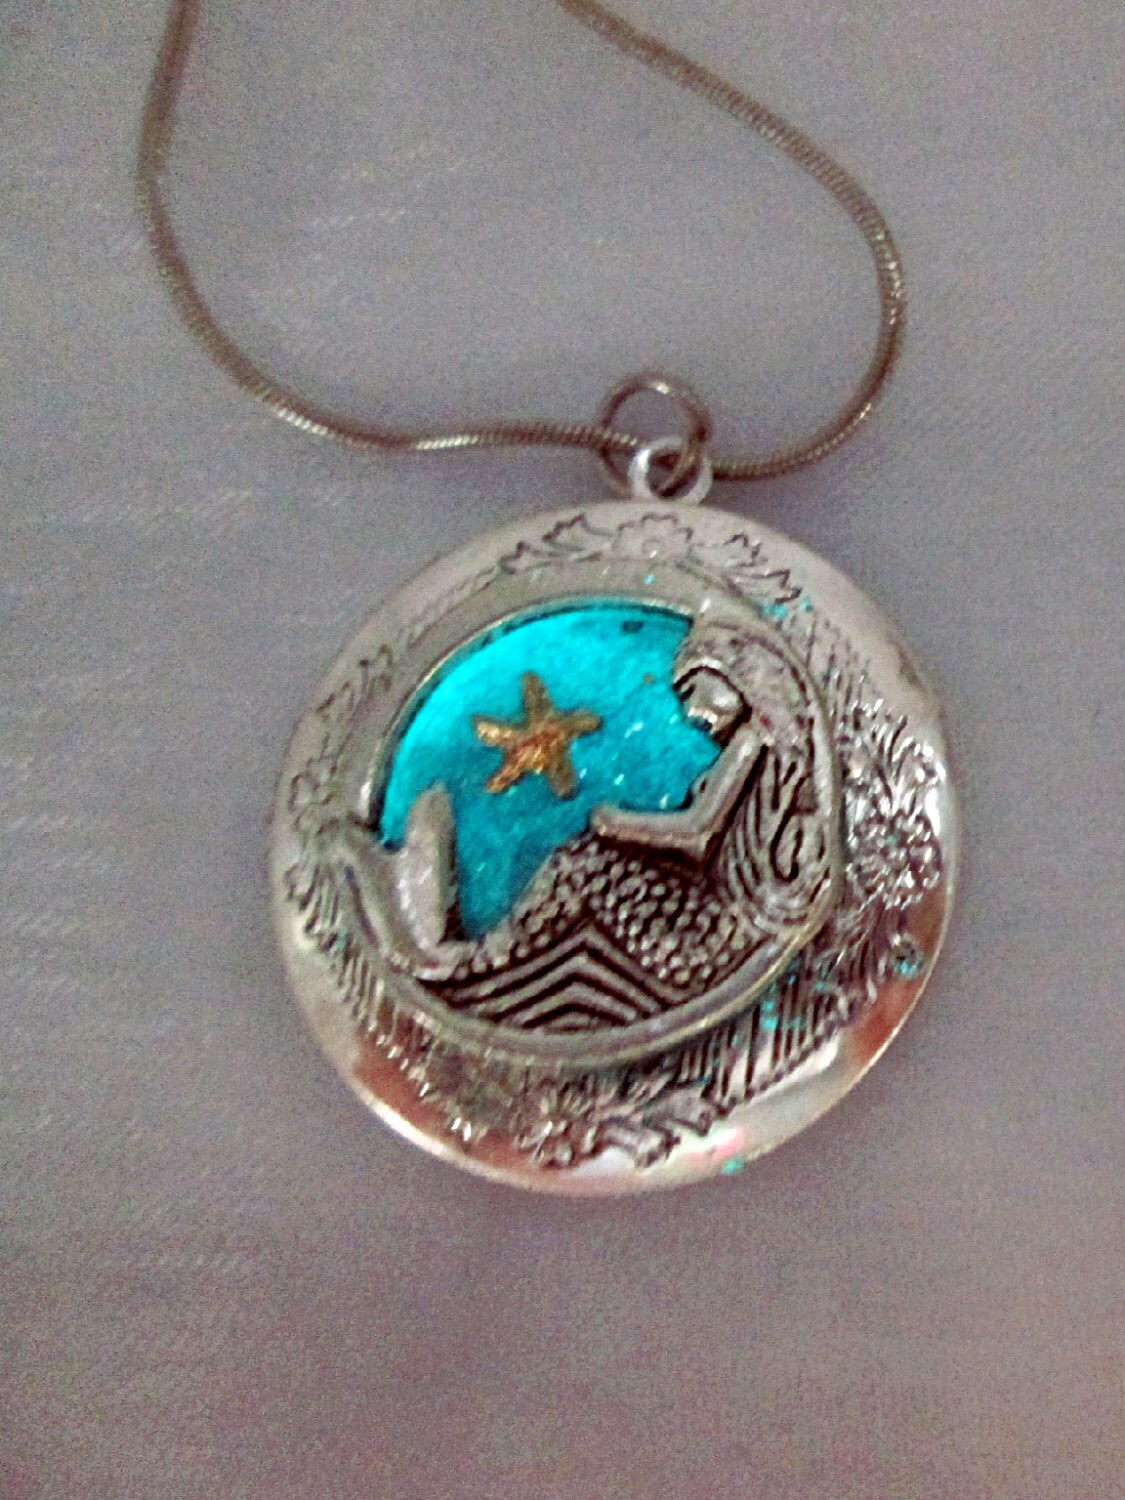  Mermaid Danced in Moon Key Necklace Sea-Maid Jewelry Fantasy  Key Pendant Glass Cabochon Key Necklace Handmade Ocean Jewellery-MT147 (W1)  : Office Products